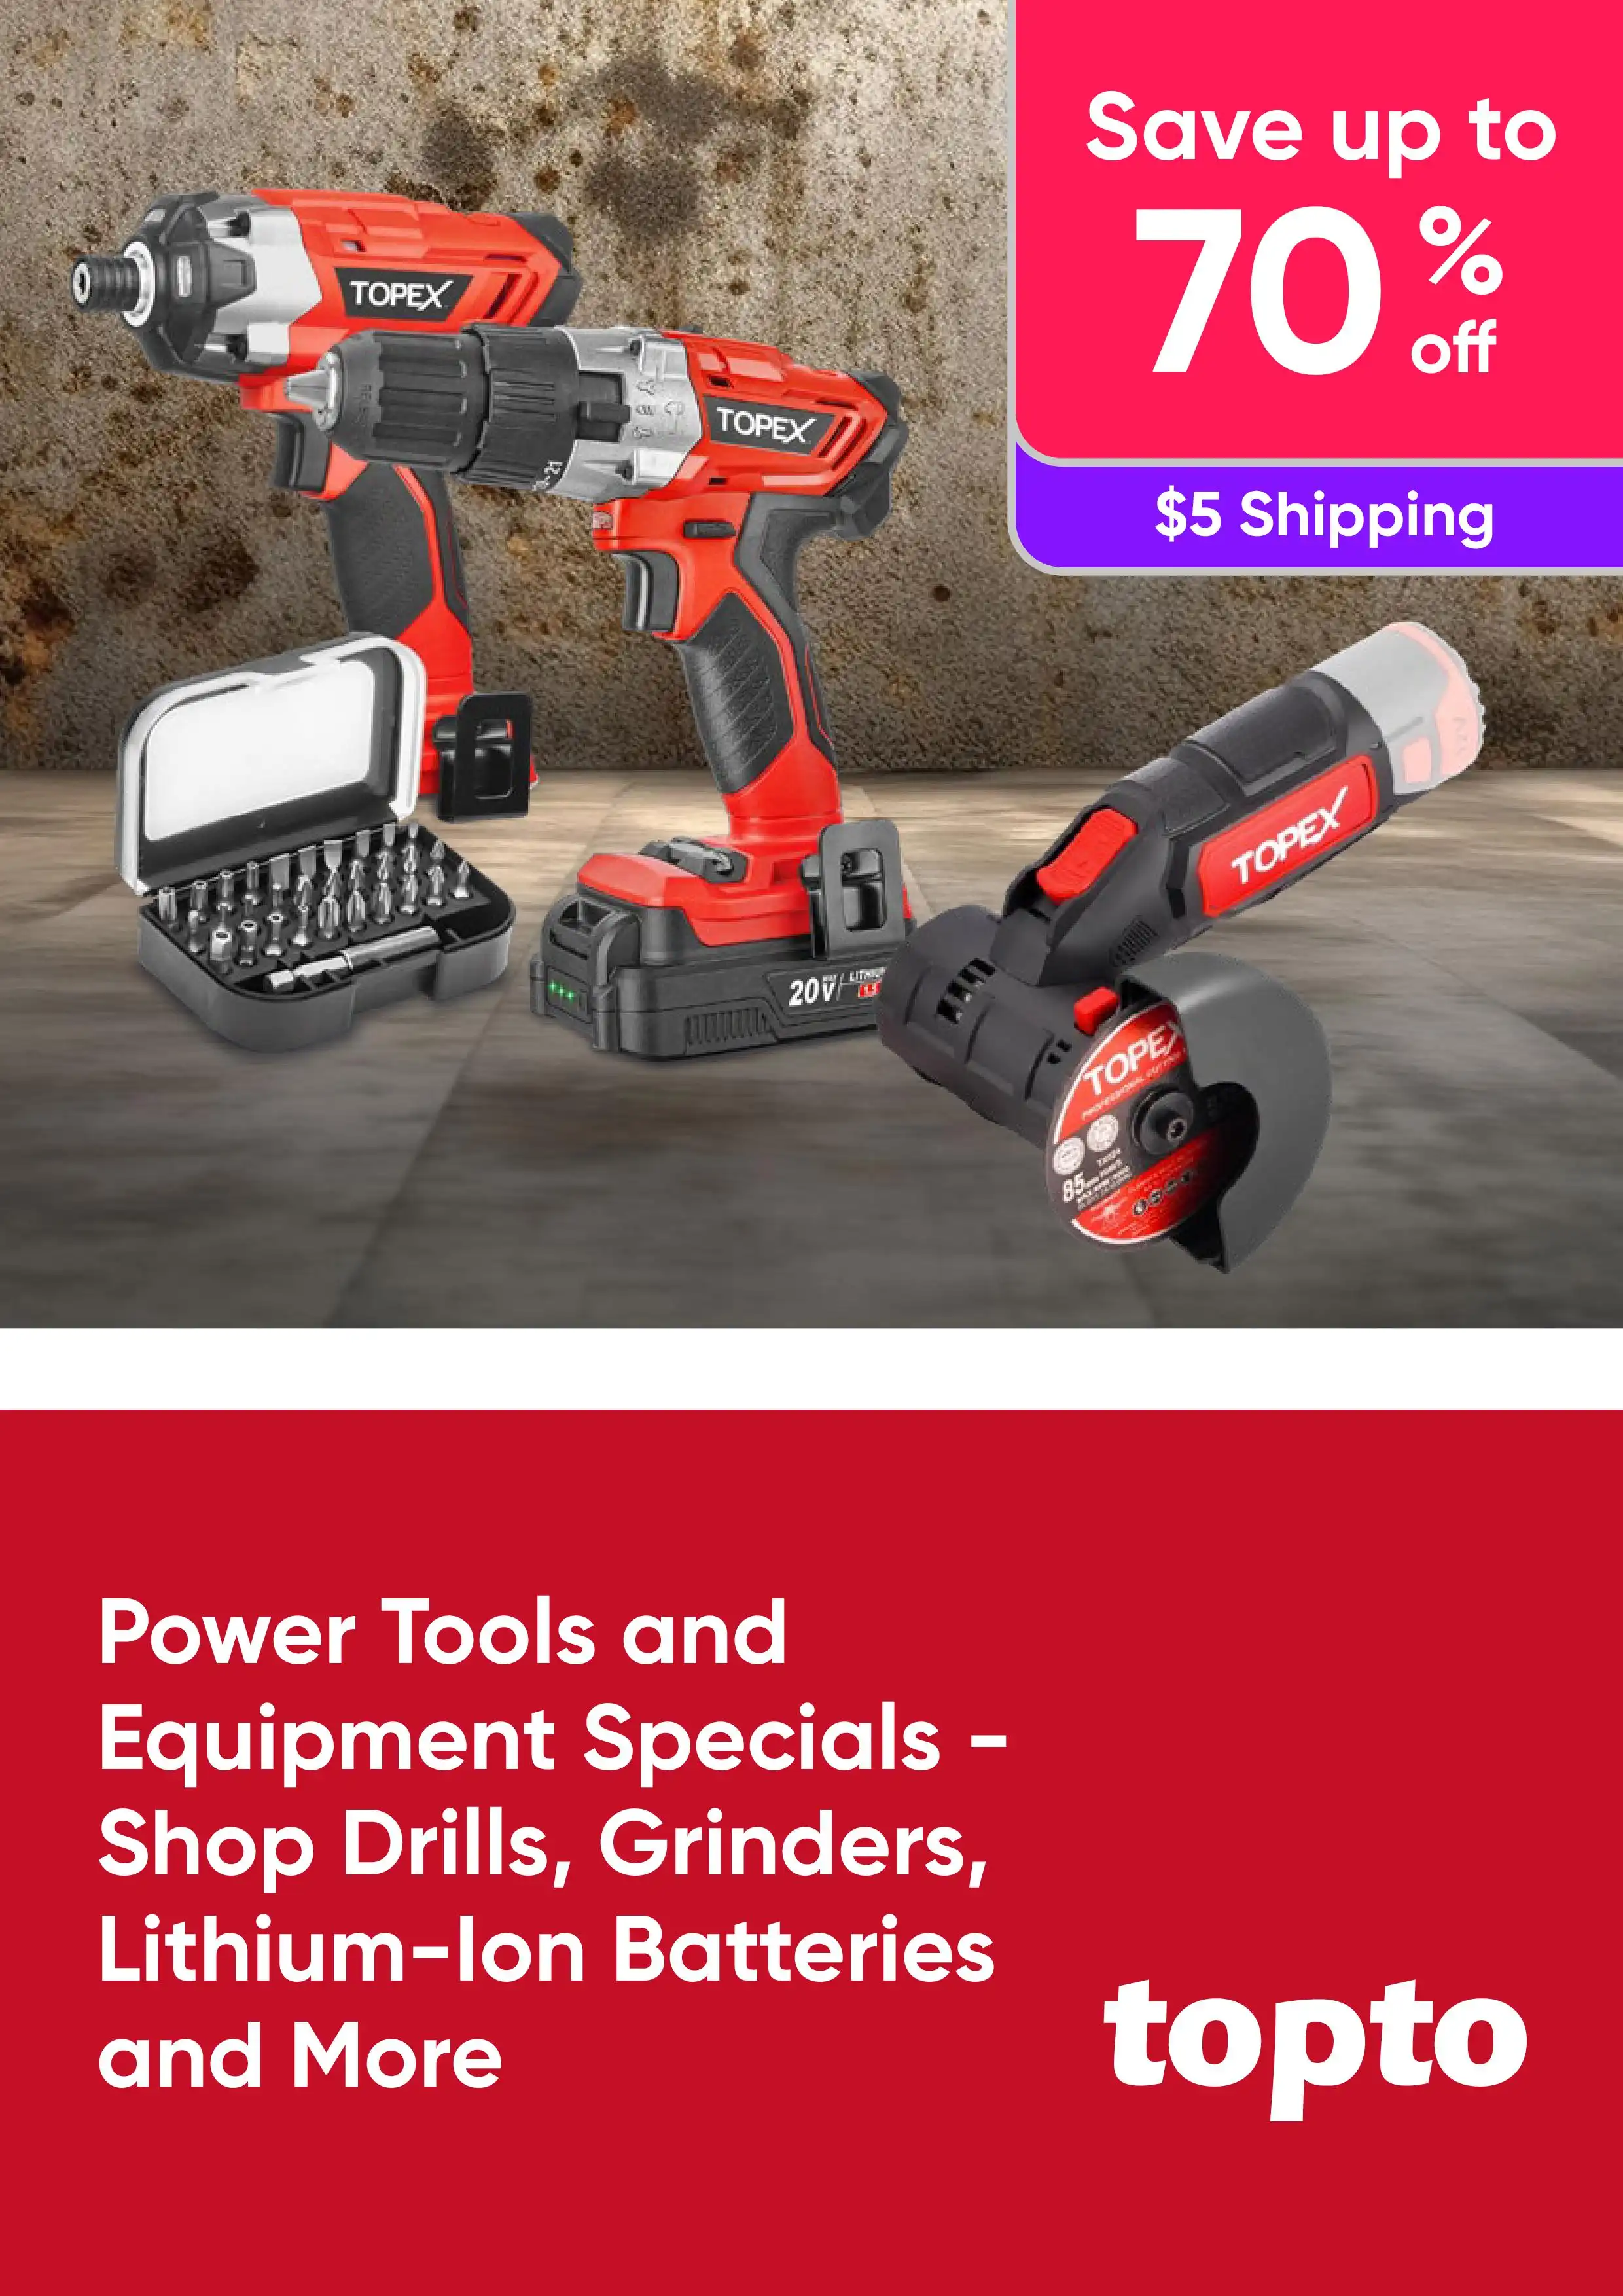 Power Tools and Equipment Specials - Shop Drills, Grinders, Lithium-Ion Batteries and More - Save Up To 70% Off